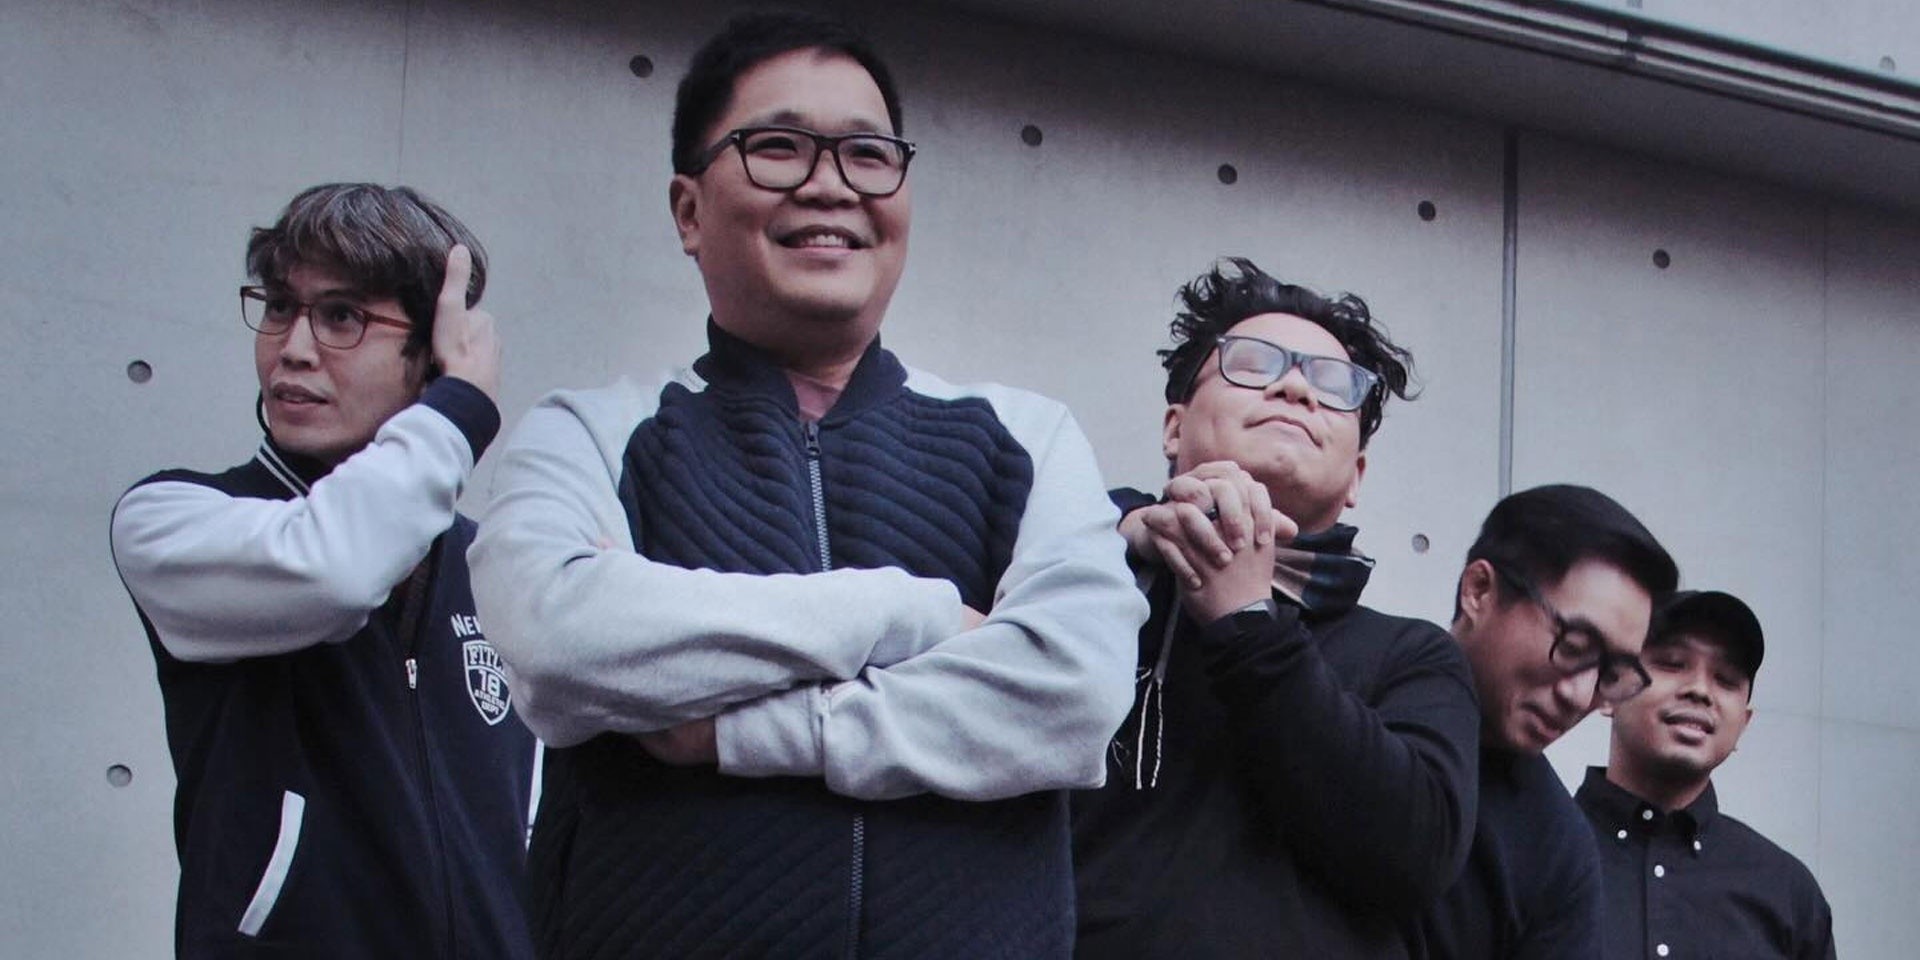 The Itchyworms announce Canada tour this November